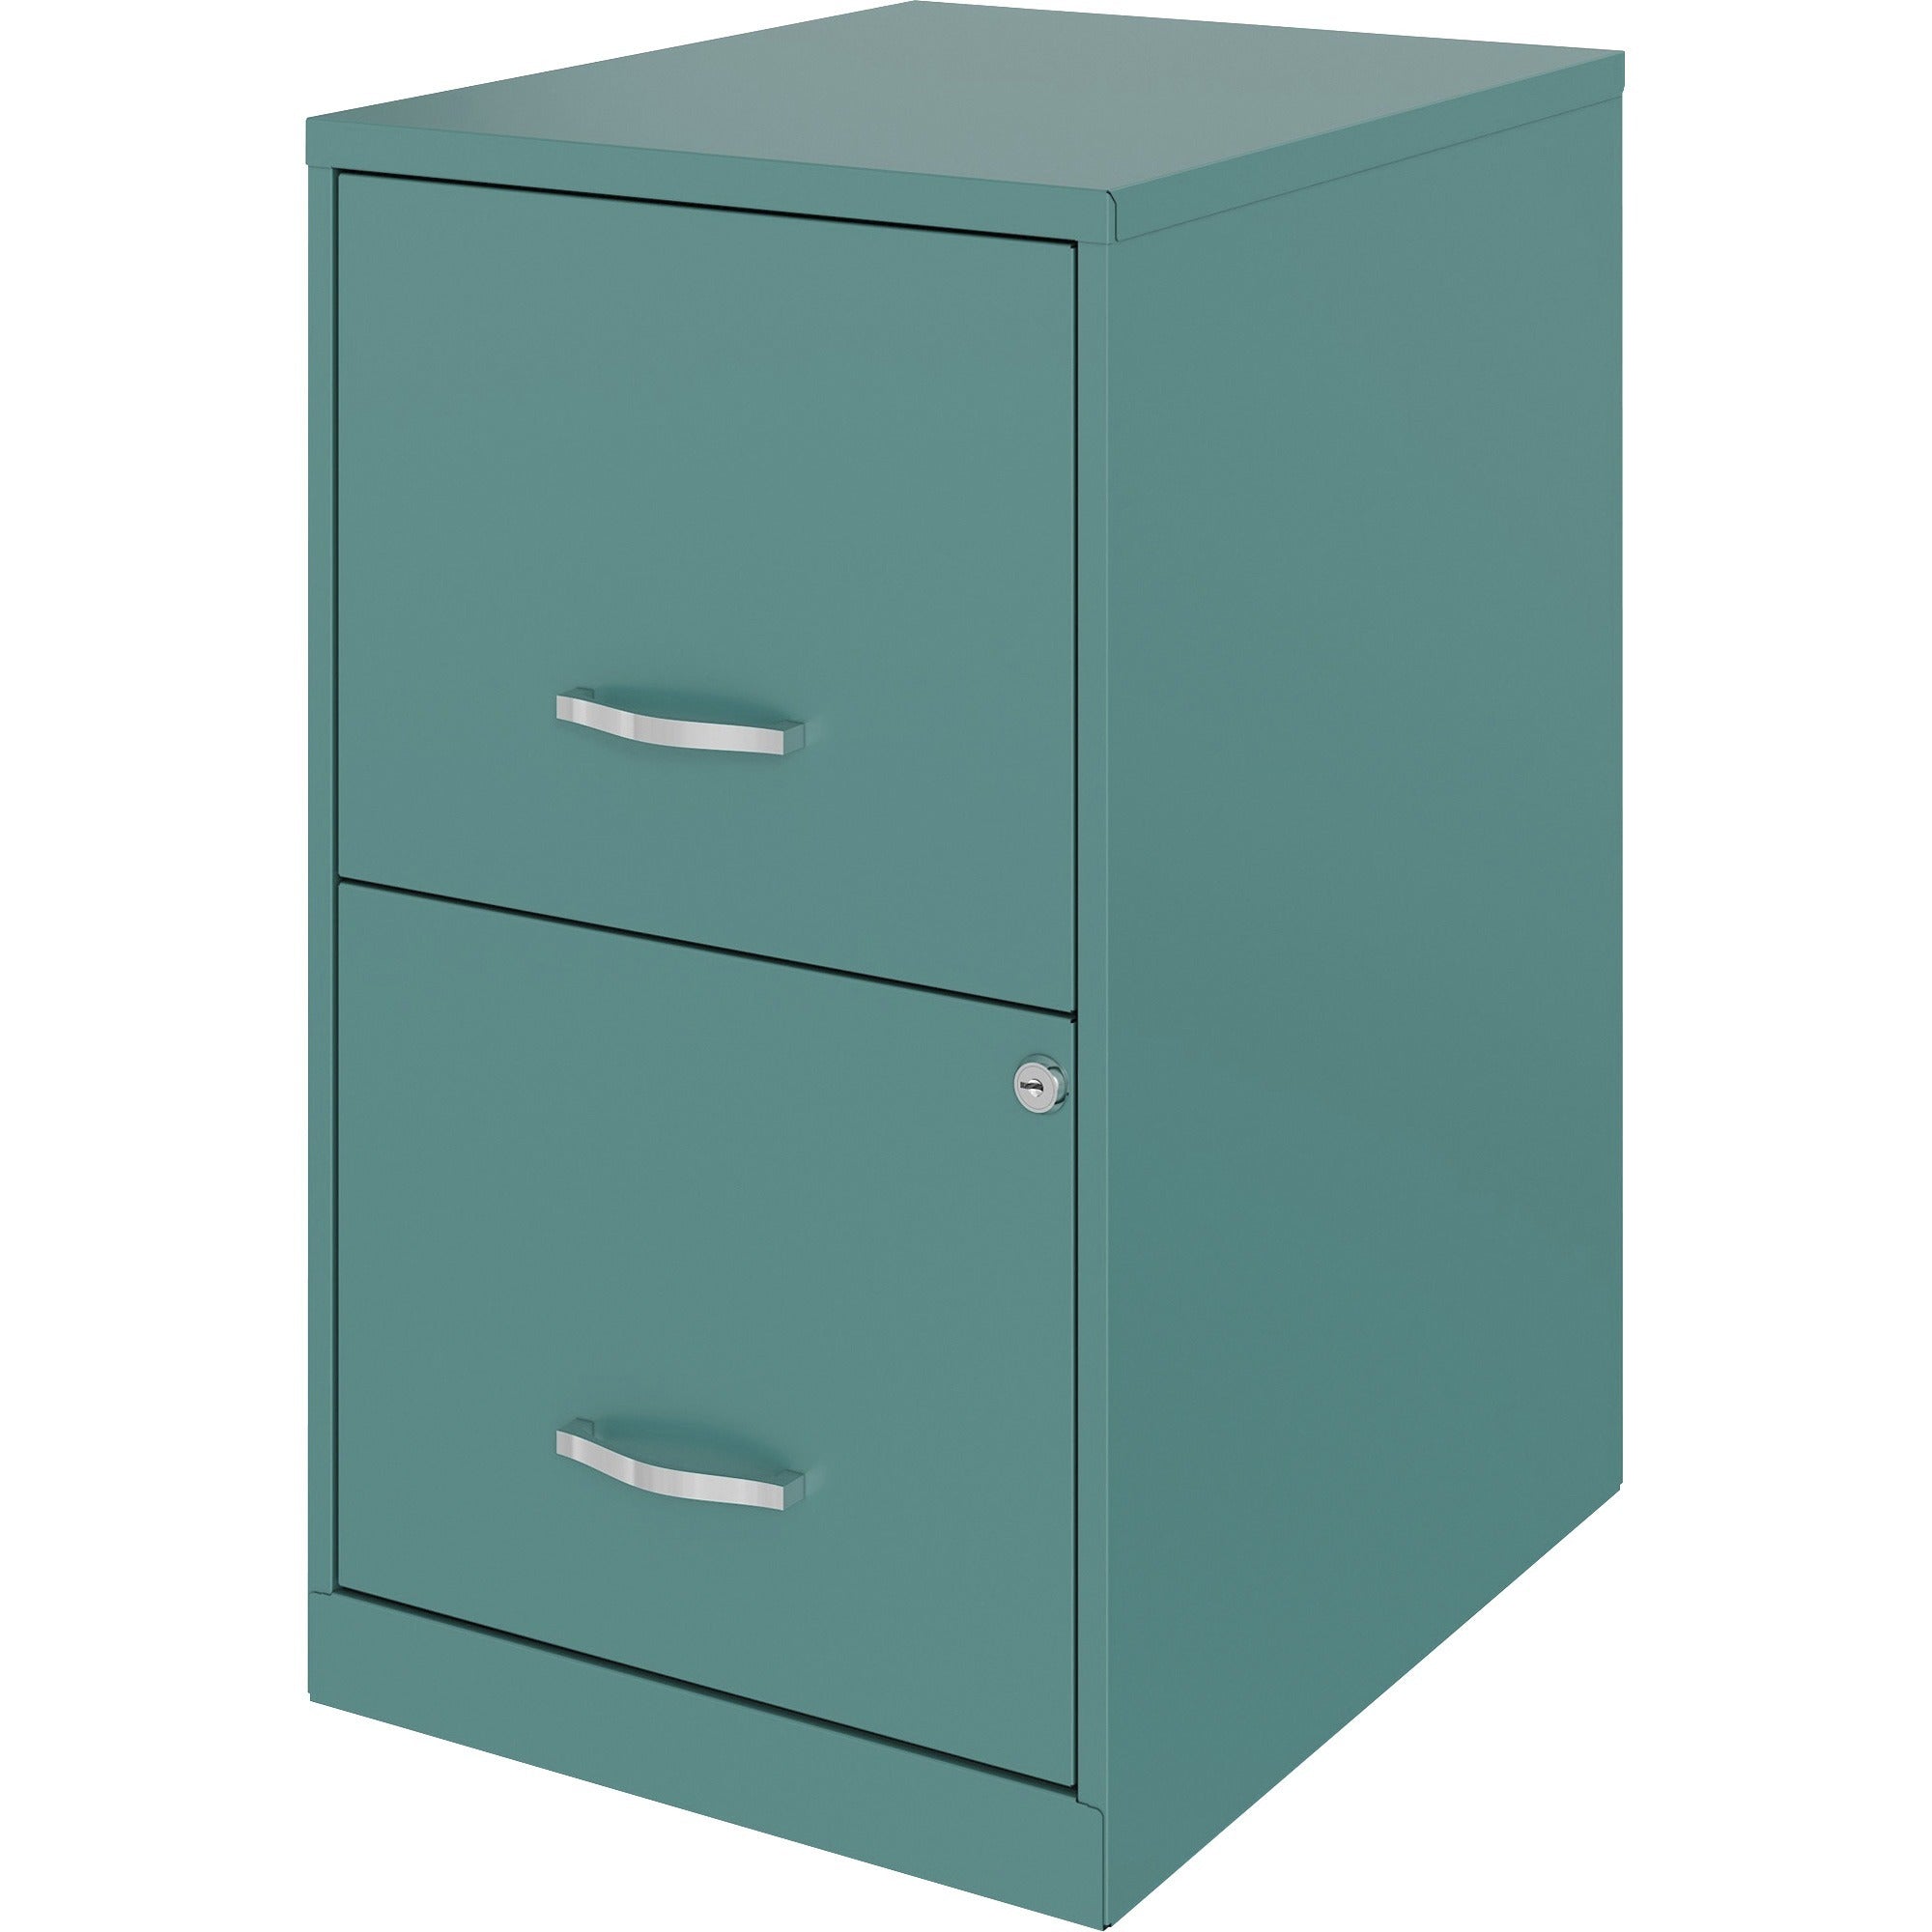 nusparc-file-cabinet-142-x-18-x-245-2-x-drawers-for-file-letter-vertical-locking-drawer-glide-suspension-nonporous-surface-teal-baked-enamel-steel-recycled_nprvf218aatl - 3